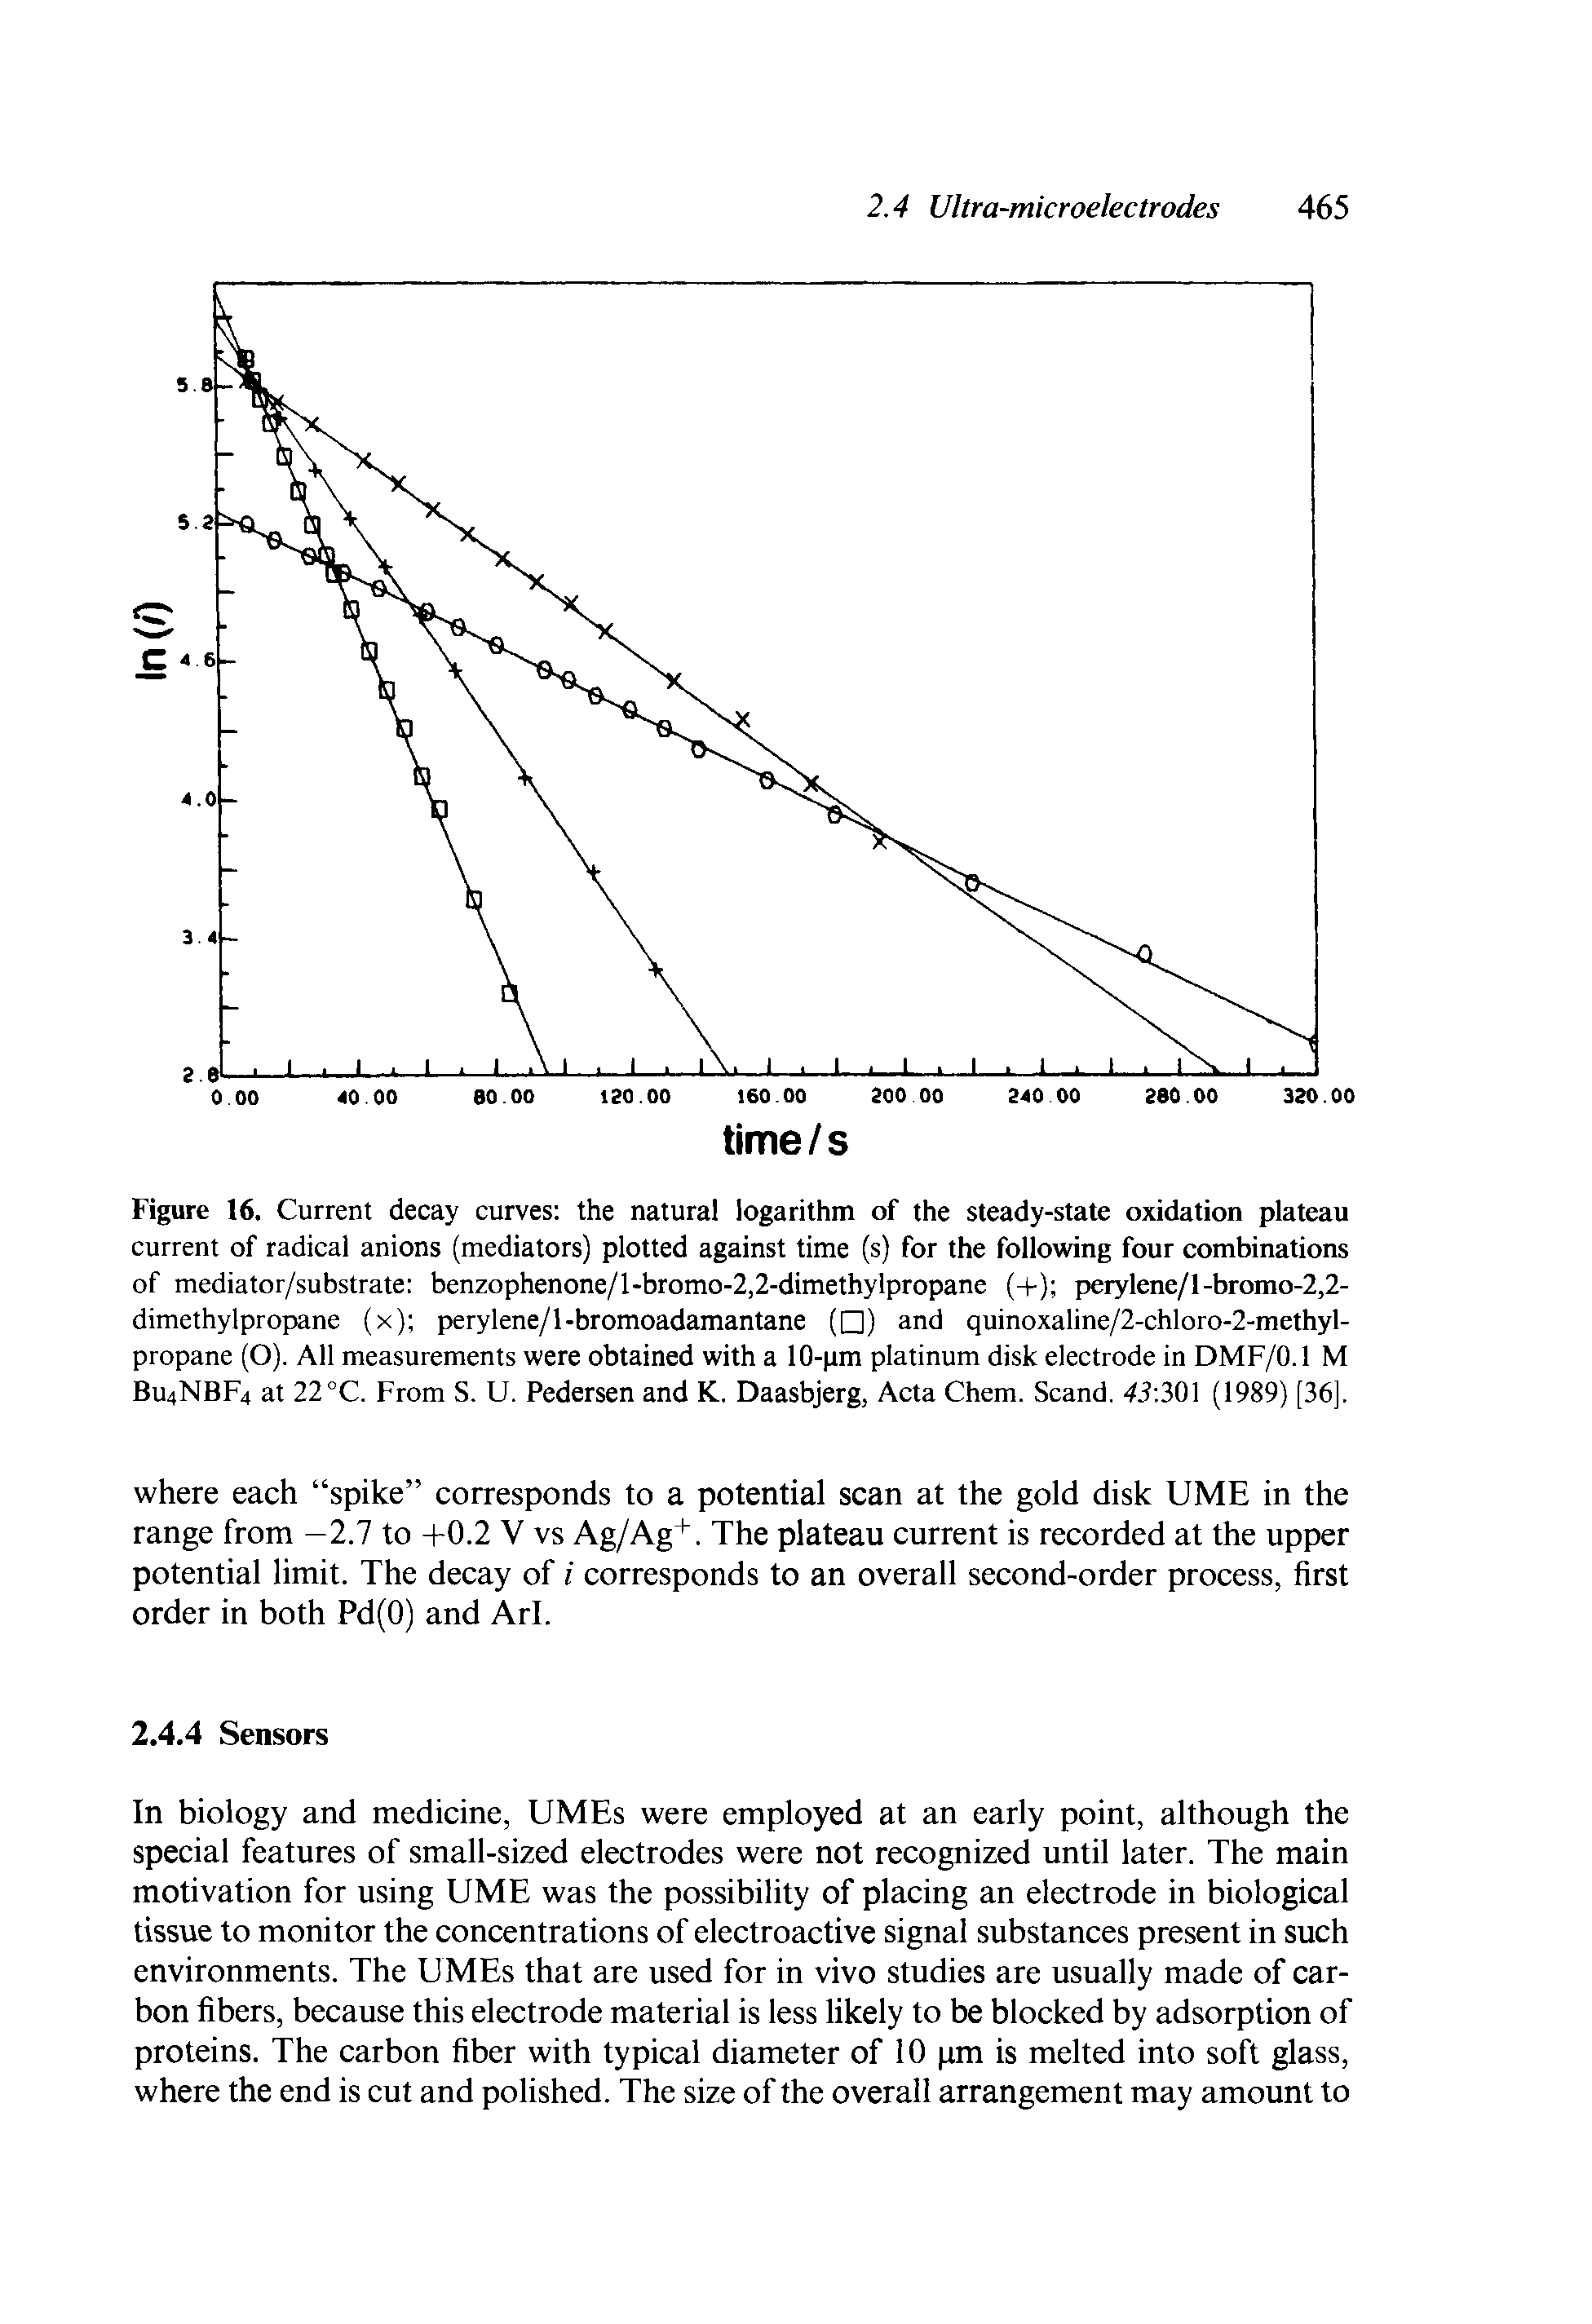 Figure 16. Current decay curves the natural logarithm of the steady-state oxidation plateau current of radical anions (mediators) plotted against time (s) for the following four combinations of mediator/substrate benzophenone/l-bromo-2,2-dimethylpropane (-(-) perylene/l-bromo-2,2-dimethylpropane (x) perylene/l-bromoadamantane ( ) and quinoxaline/2-chloro-2-methyl-propane (O). All measurements were obtained with a 10-pm platinum disk electrode in DMF/0.1 M BU4NBF4 at 22°C. From S. U. Pedersen and K. Daasbjerg, Acta Chem. Scand, 43 30 (1989) [36],...